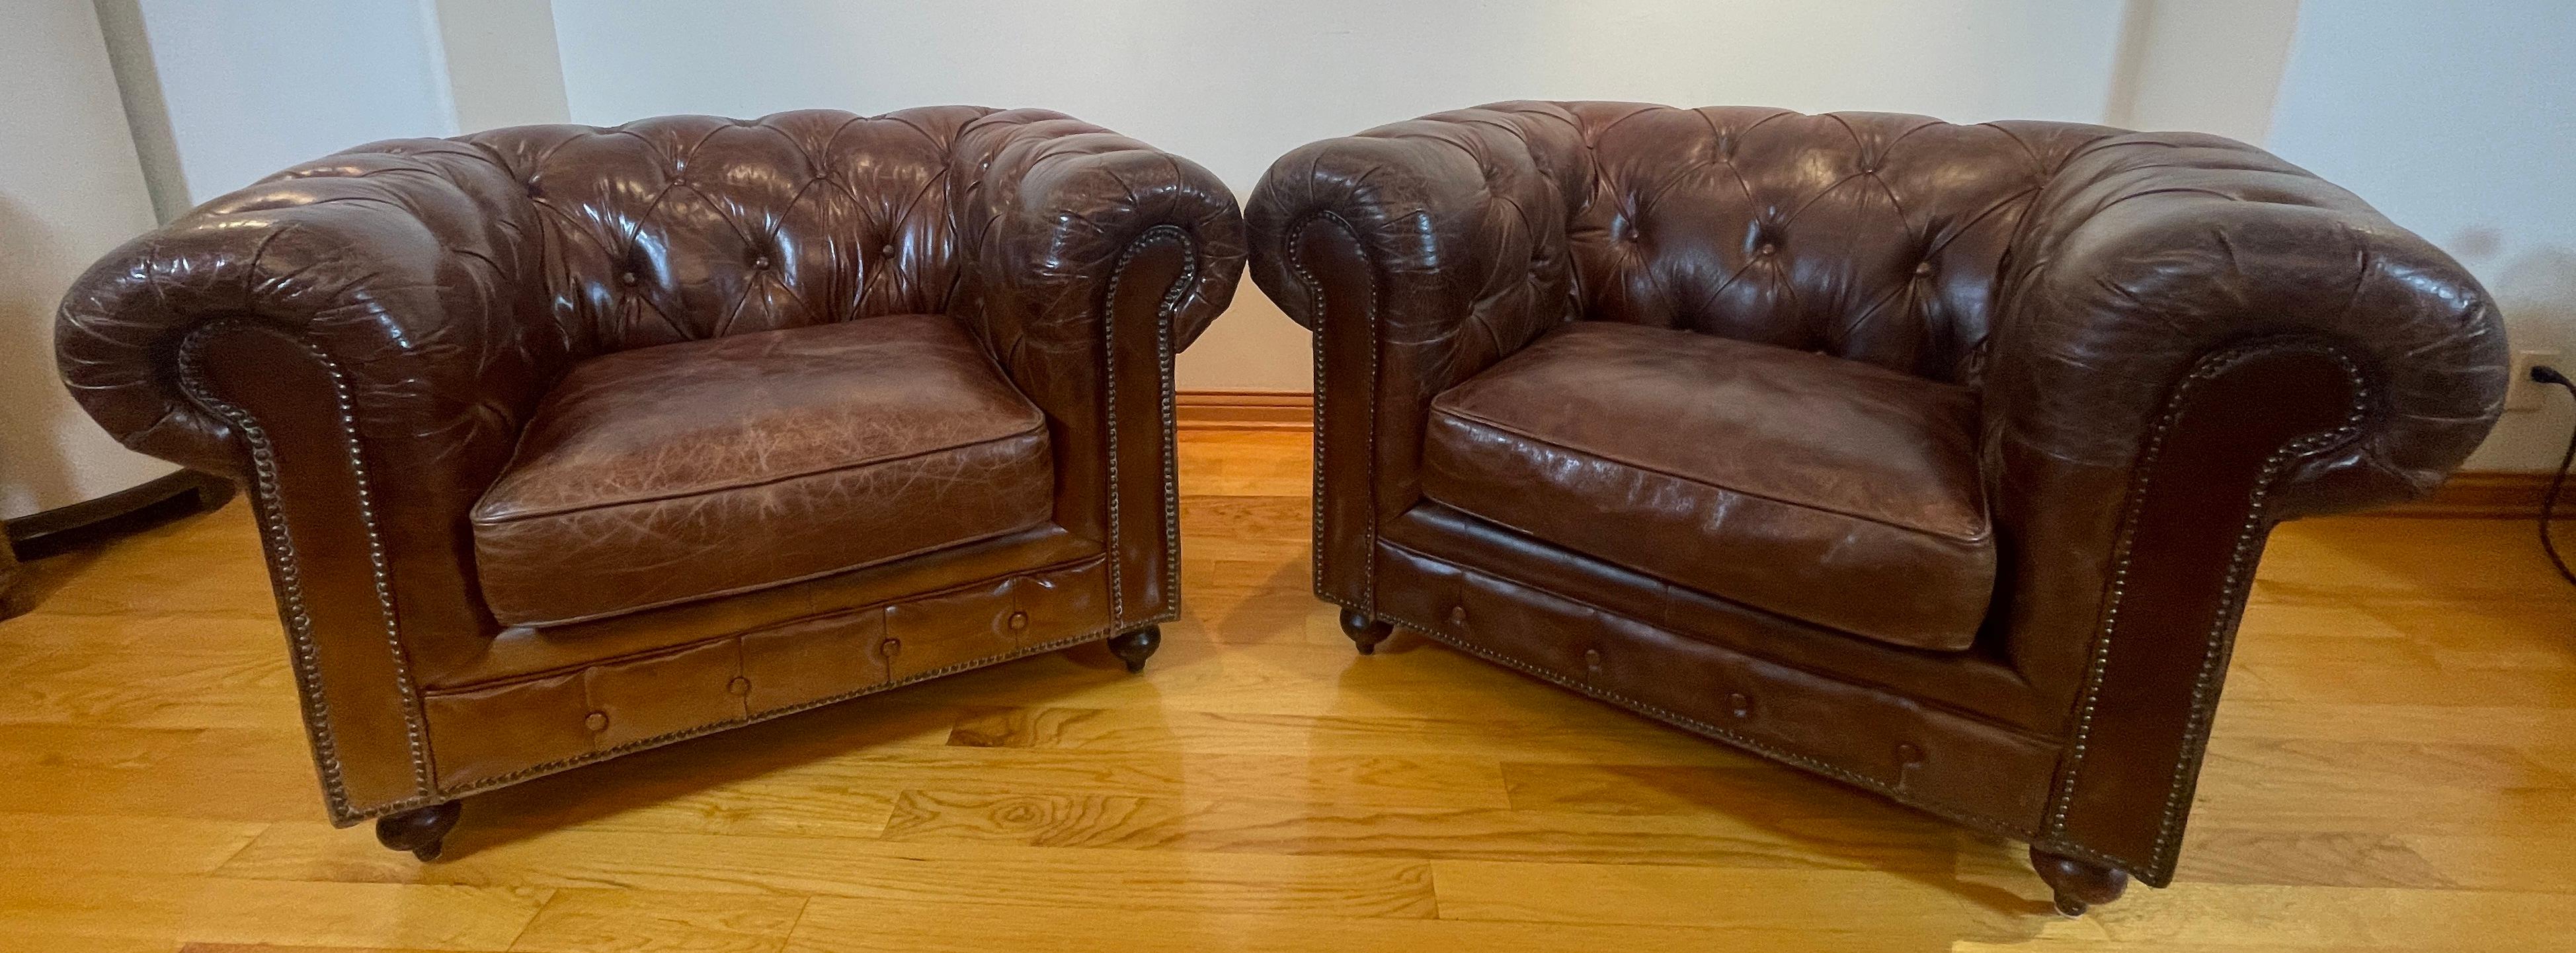 Vintage English Brown Leather Tufted Chesterfield Club Armchairs a Pair For Sale 1